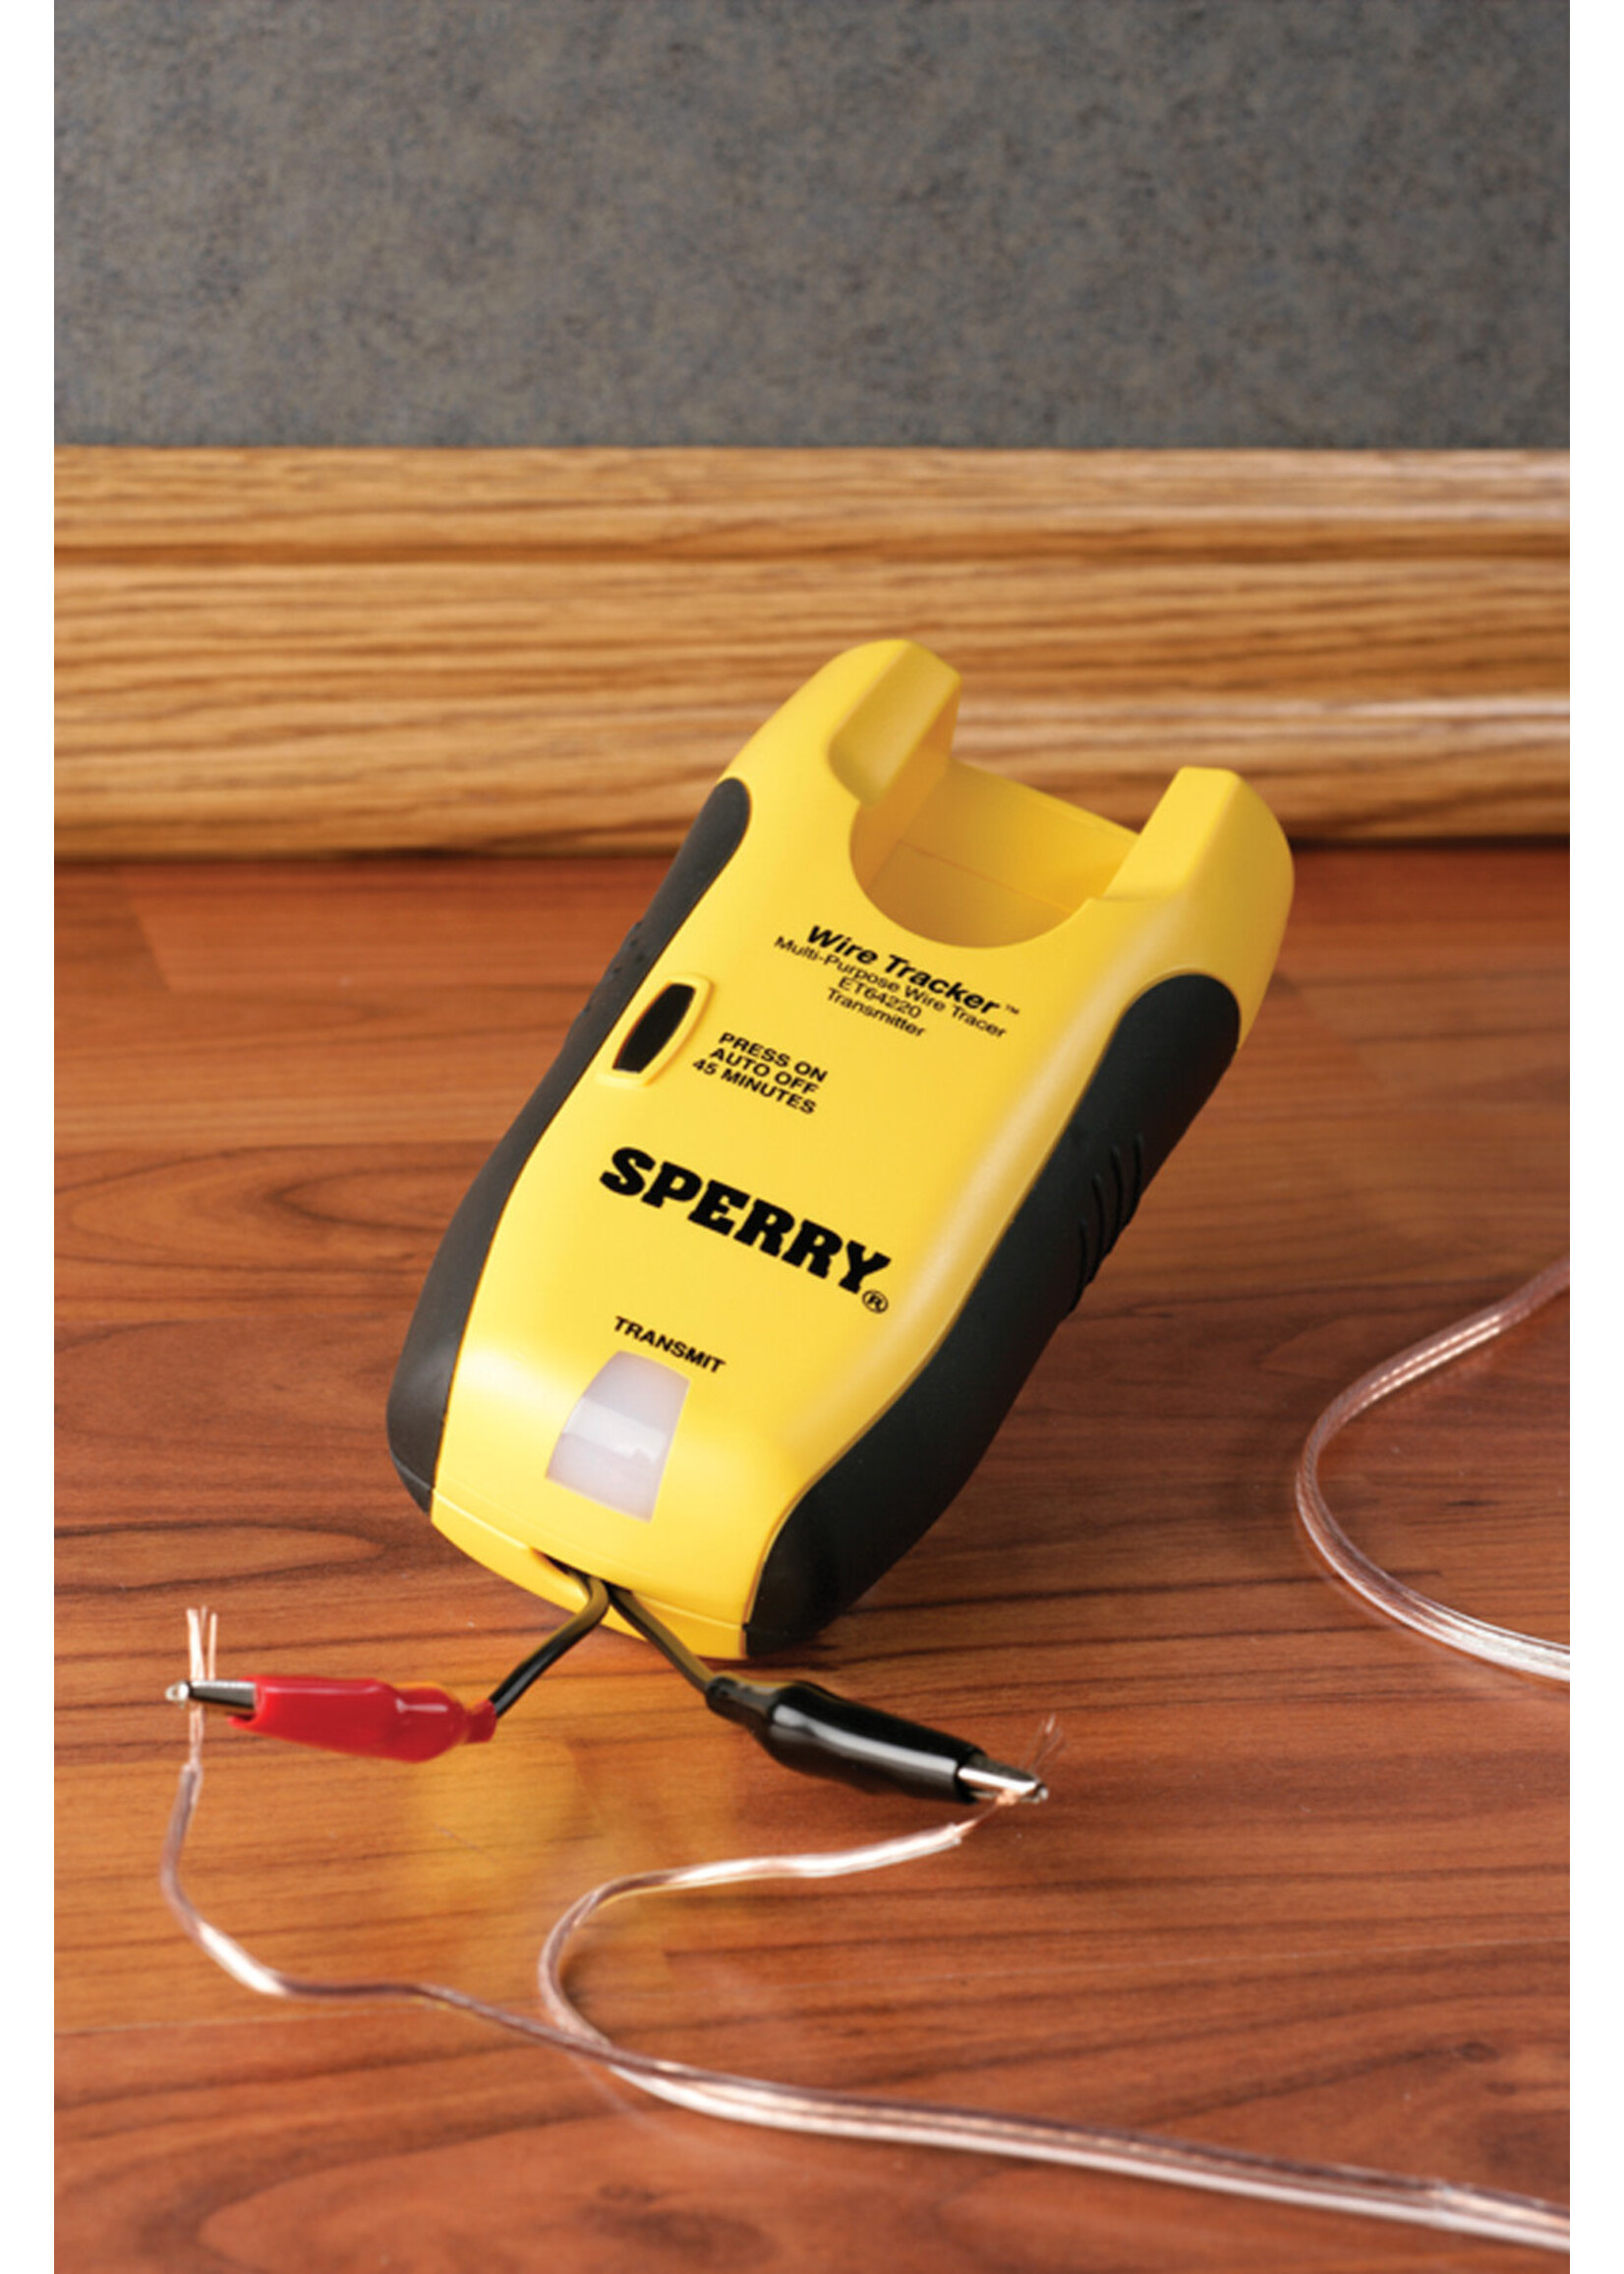 SPERRY ET64220 Lan WireTracker Tone and Probe Wire Tracer, Identifies Coax, CAT 5, Speaker, Phone, any Non-Energized Wire